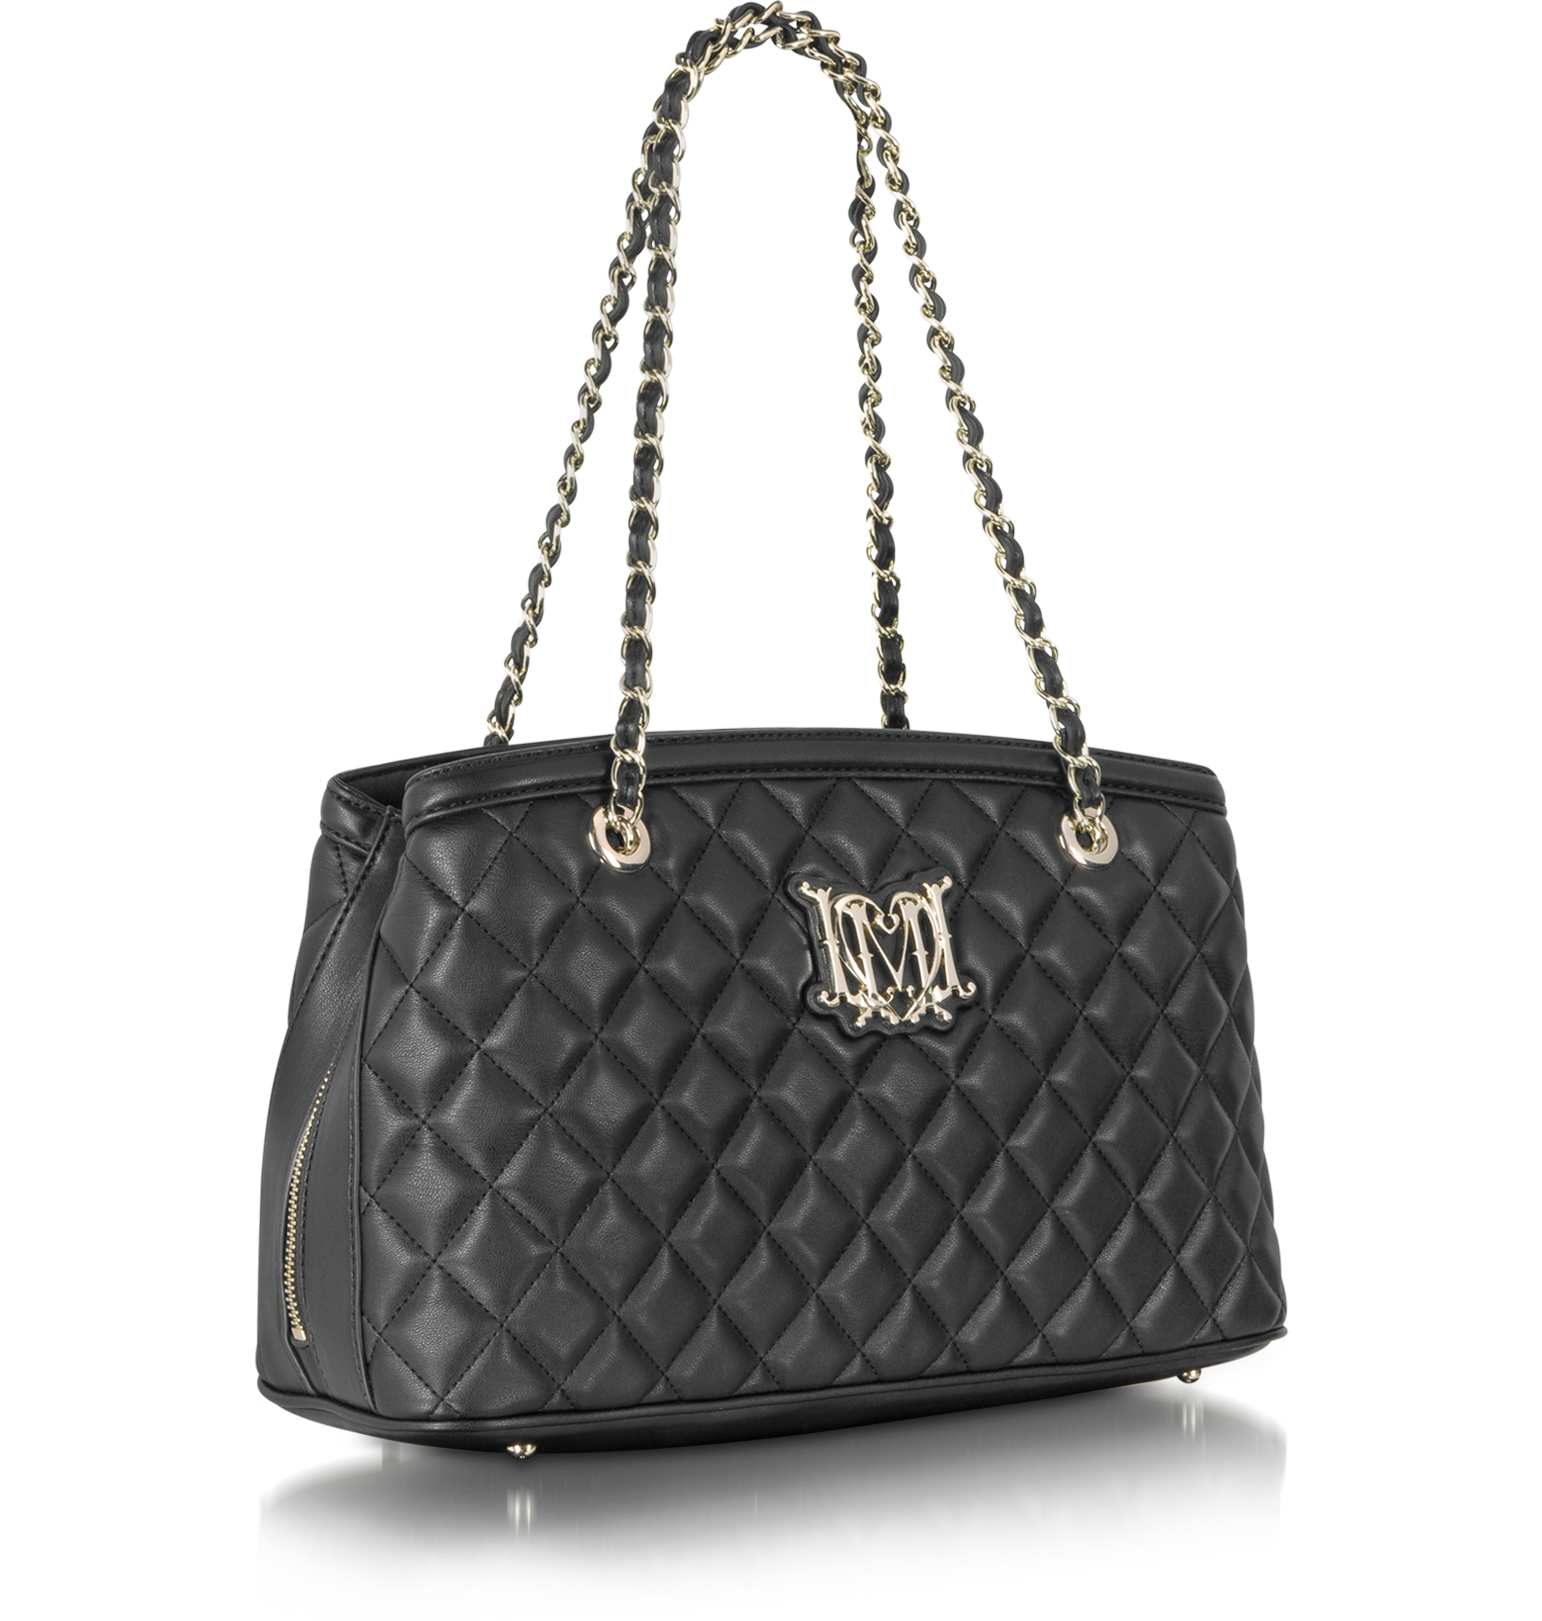 Moschino Love Moschino Black Quilted Eco Leather Satchel at FORZIERI